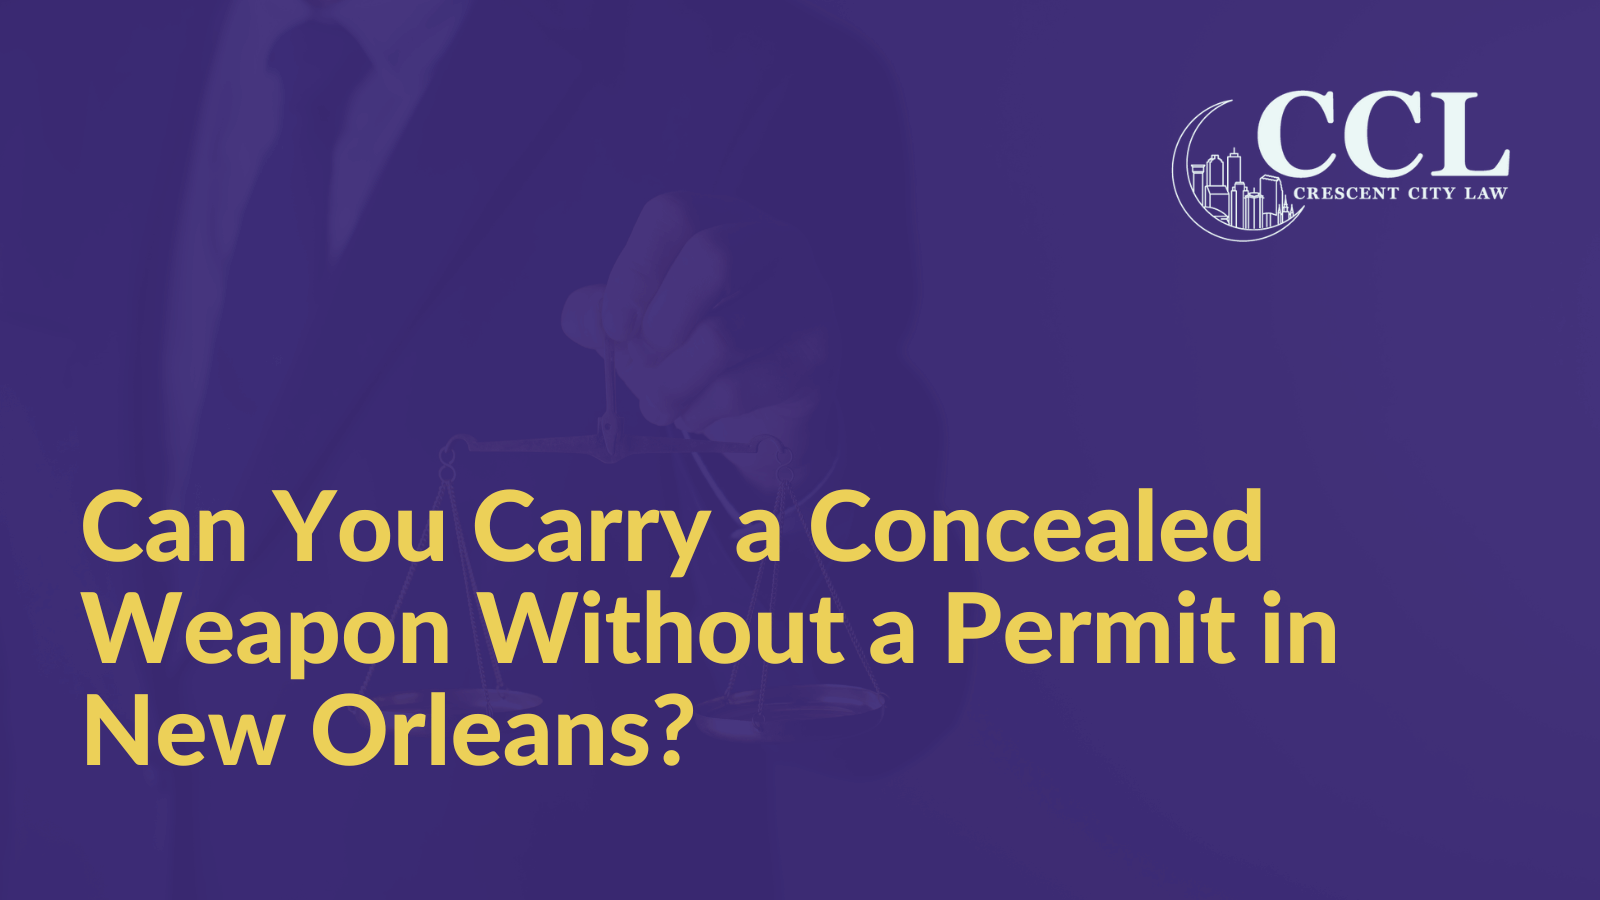 Can You Carry a Concealed Weapon Without a Permit in New Orleans?